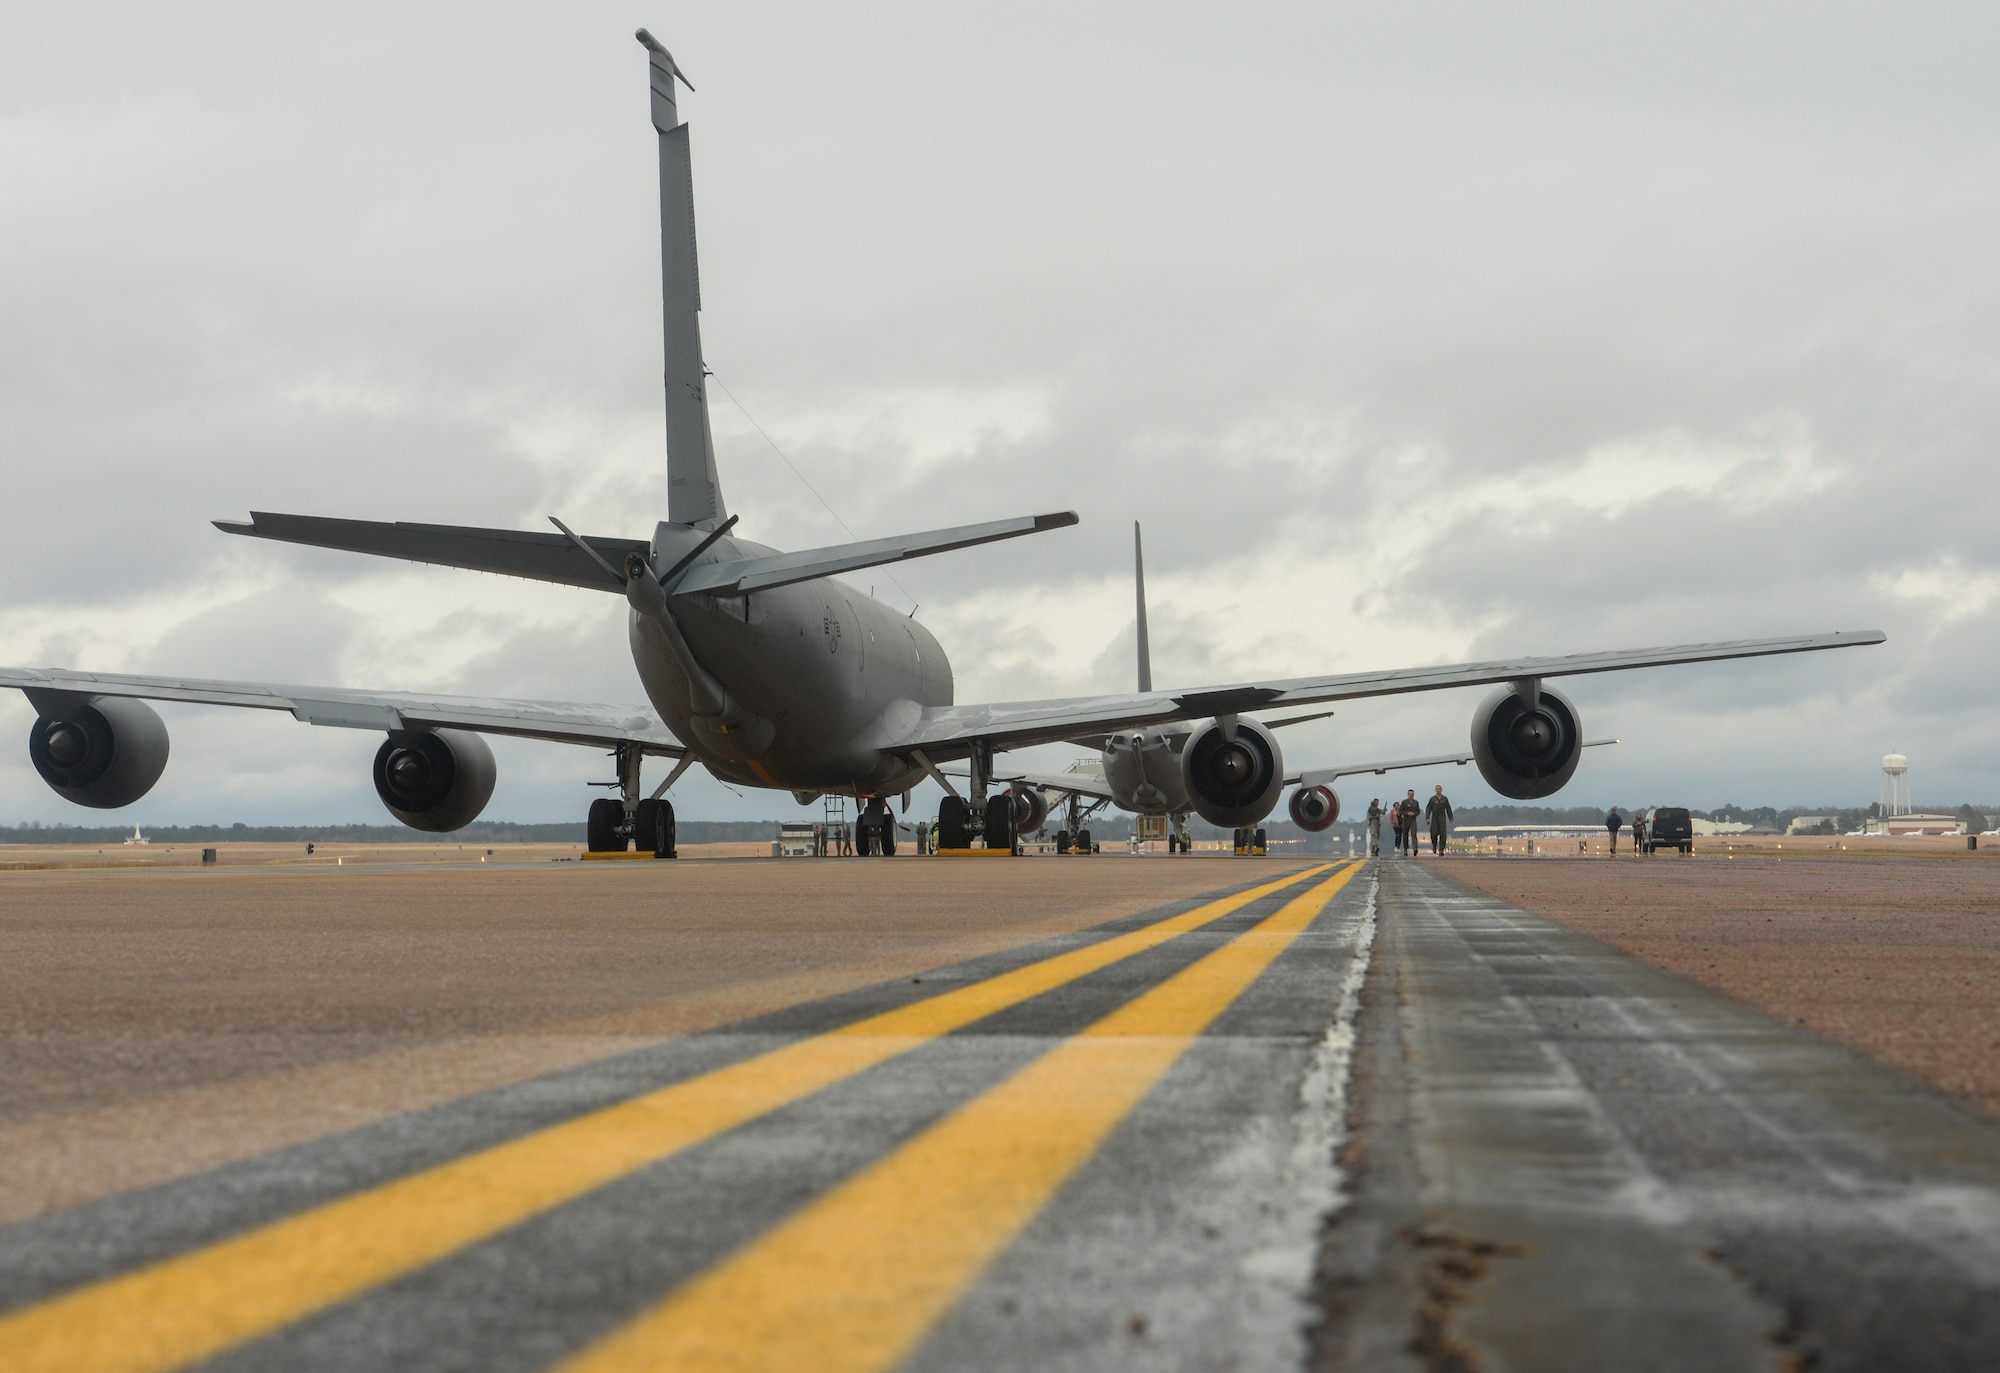 Airmen walk under the wing of a KC-135 Stratotanker Dec. 10, 2019, at Columbus Air Force Base, Miss. The KC-135 Stratotanker provides the core aerial refueling capability for the United States Air Force and has excelled in this role for more than 60 years. (U.S. Air Force photo by Airman Davis Donaldson)